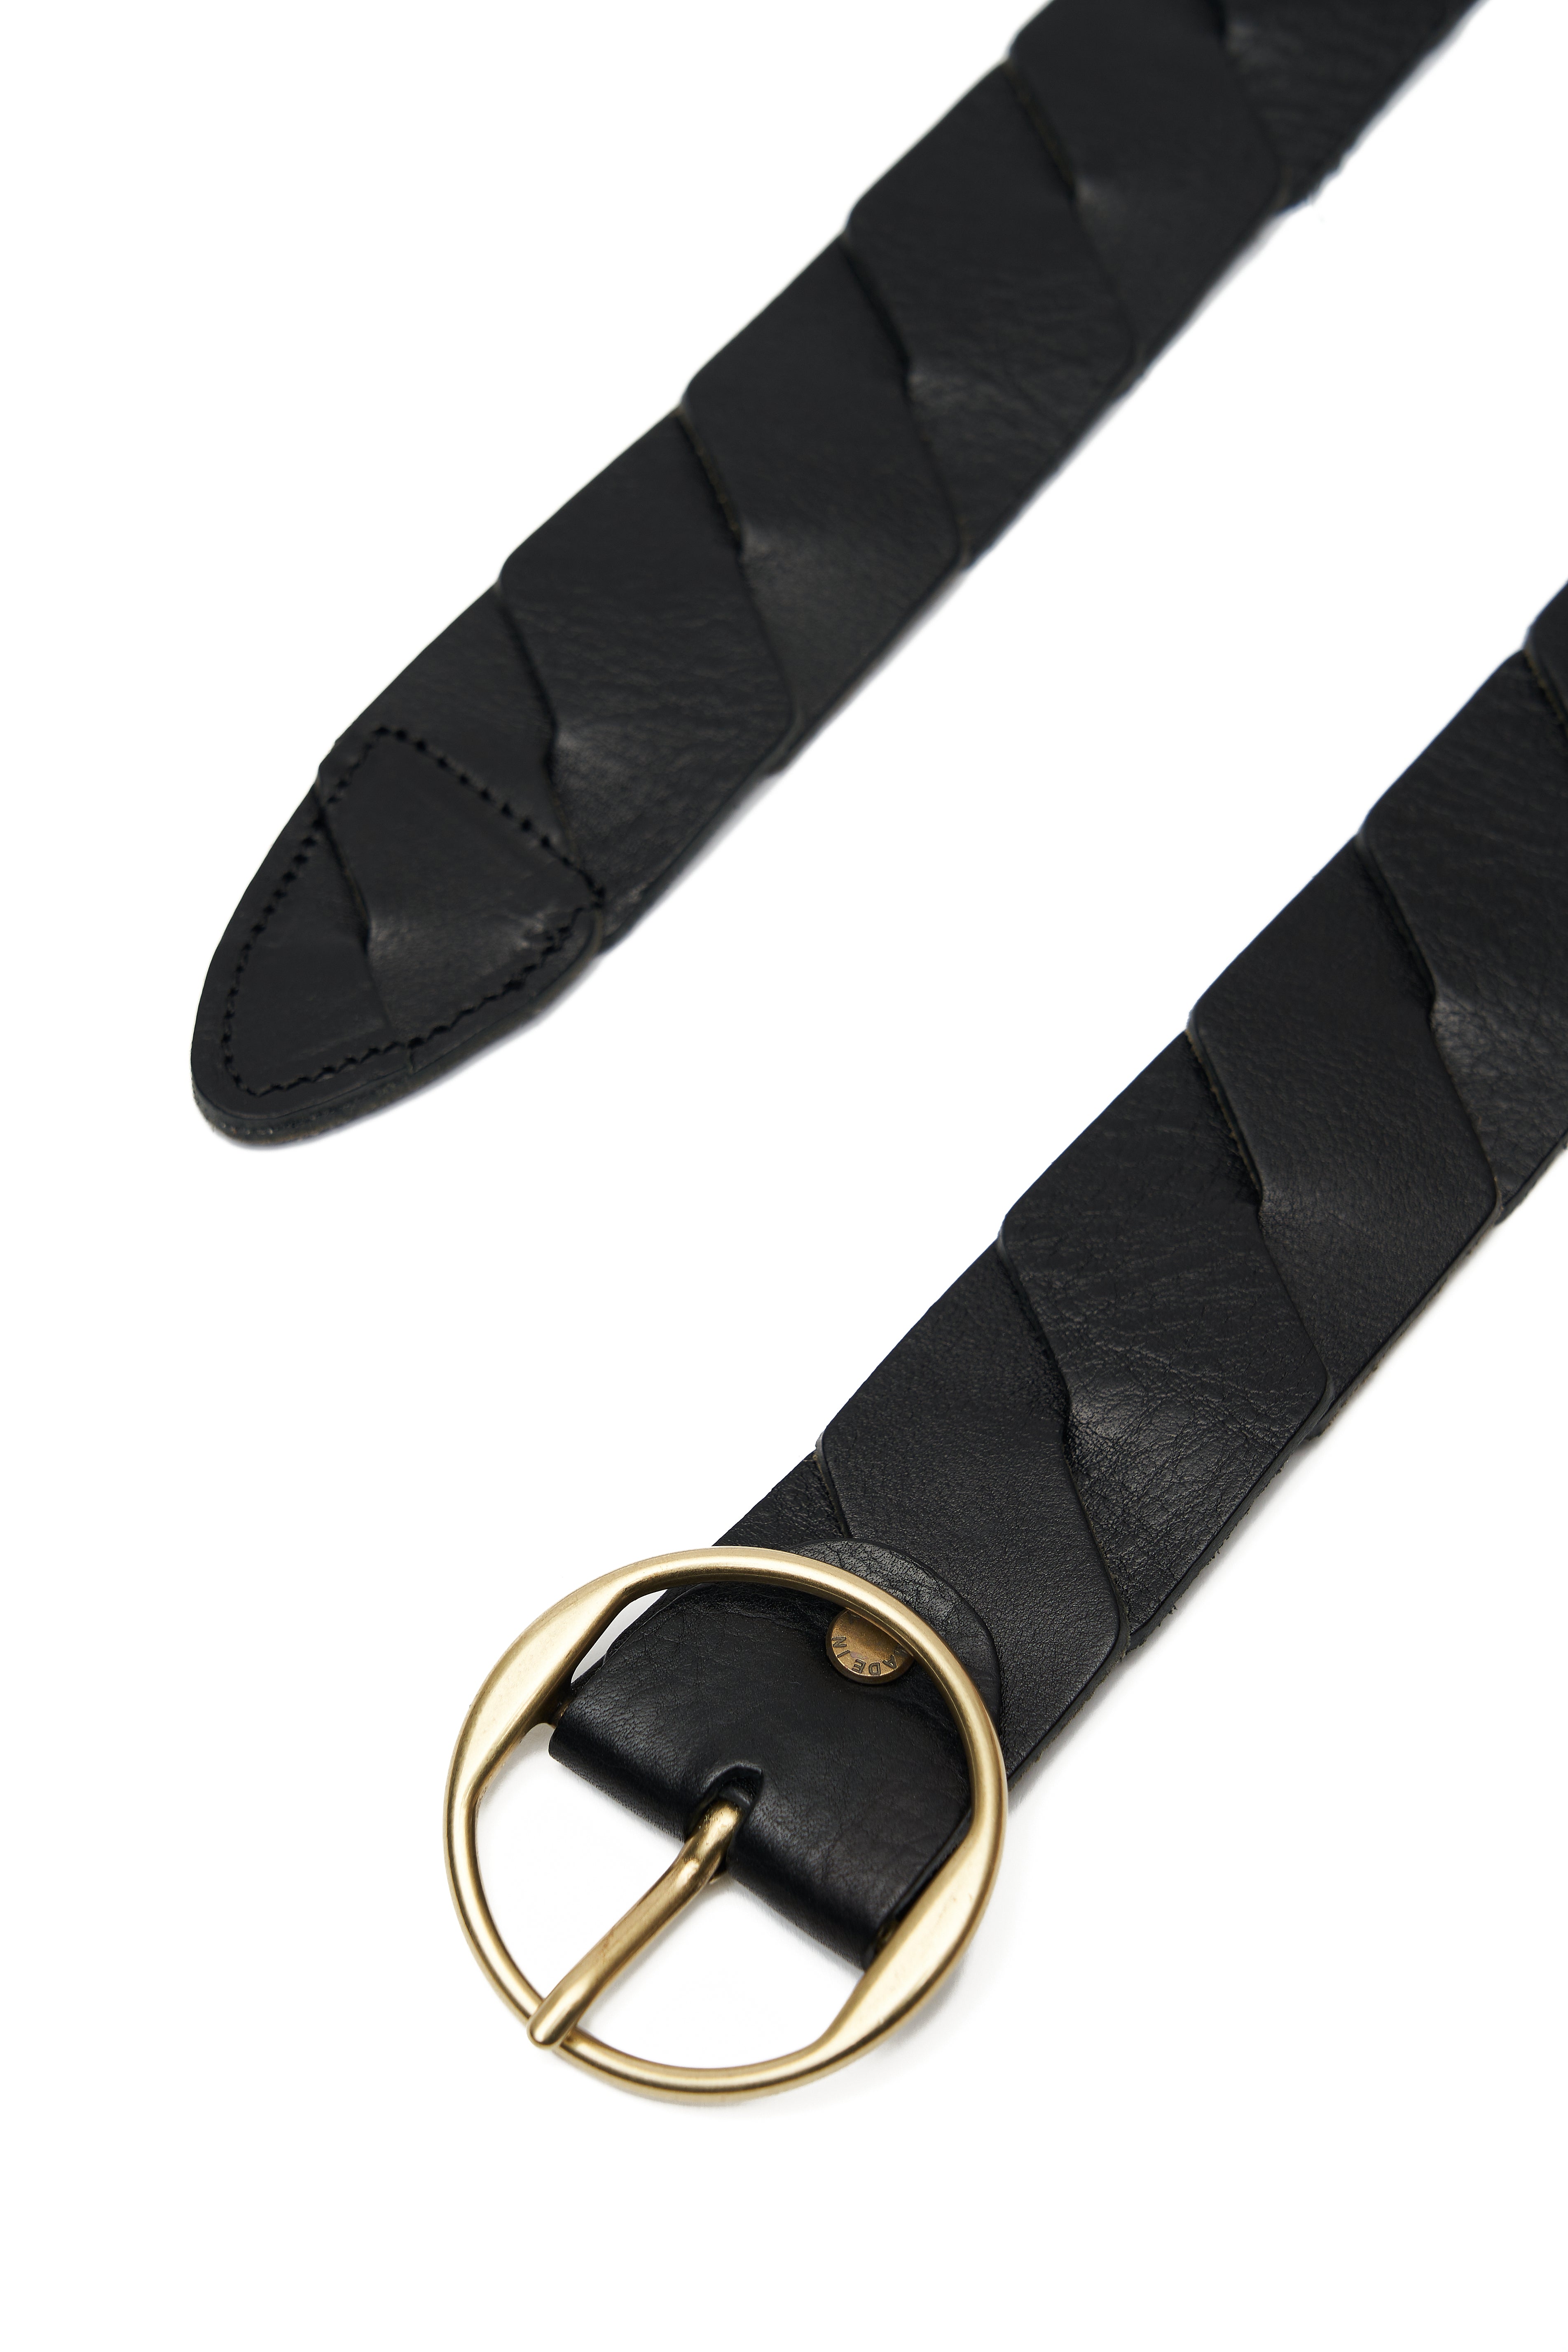 BLACK LEATHER BELT WITH BRAIDED DESIGN